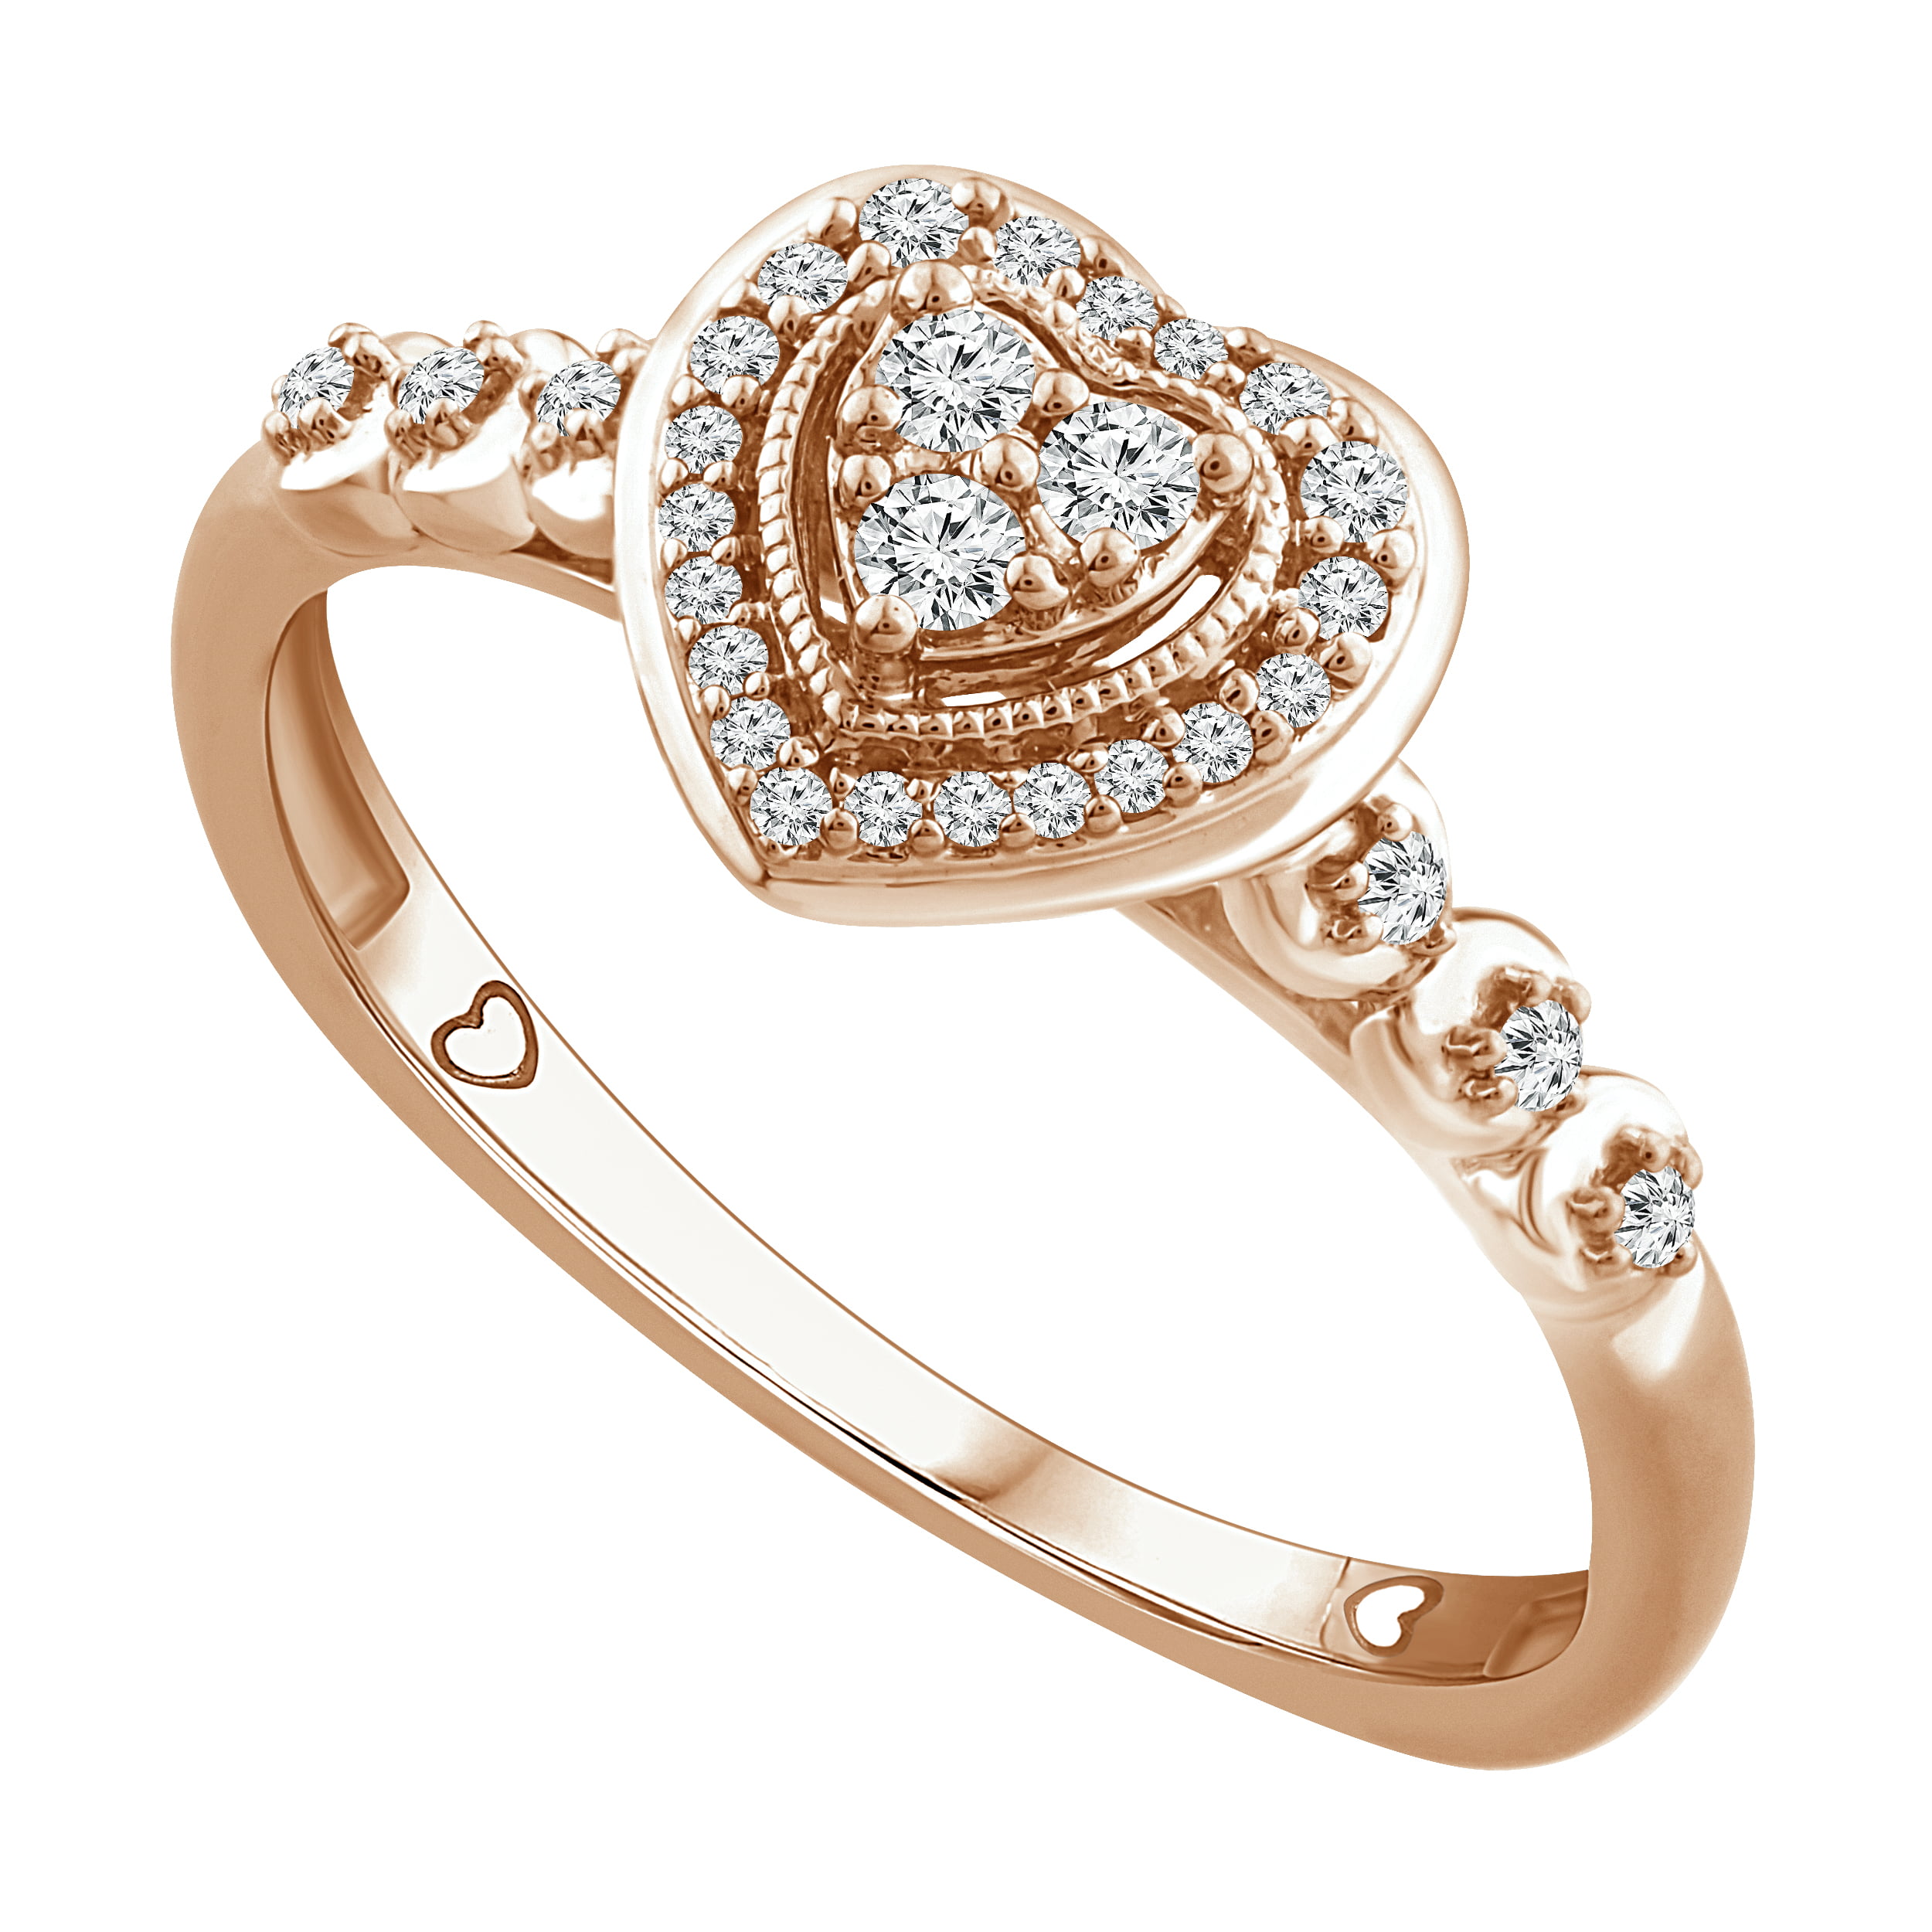 Size-9 1/10 cttw, G-H,I2-I3 3 Diamond Promise Ring in 14K Yellow Gold